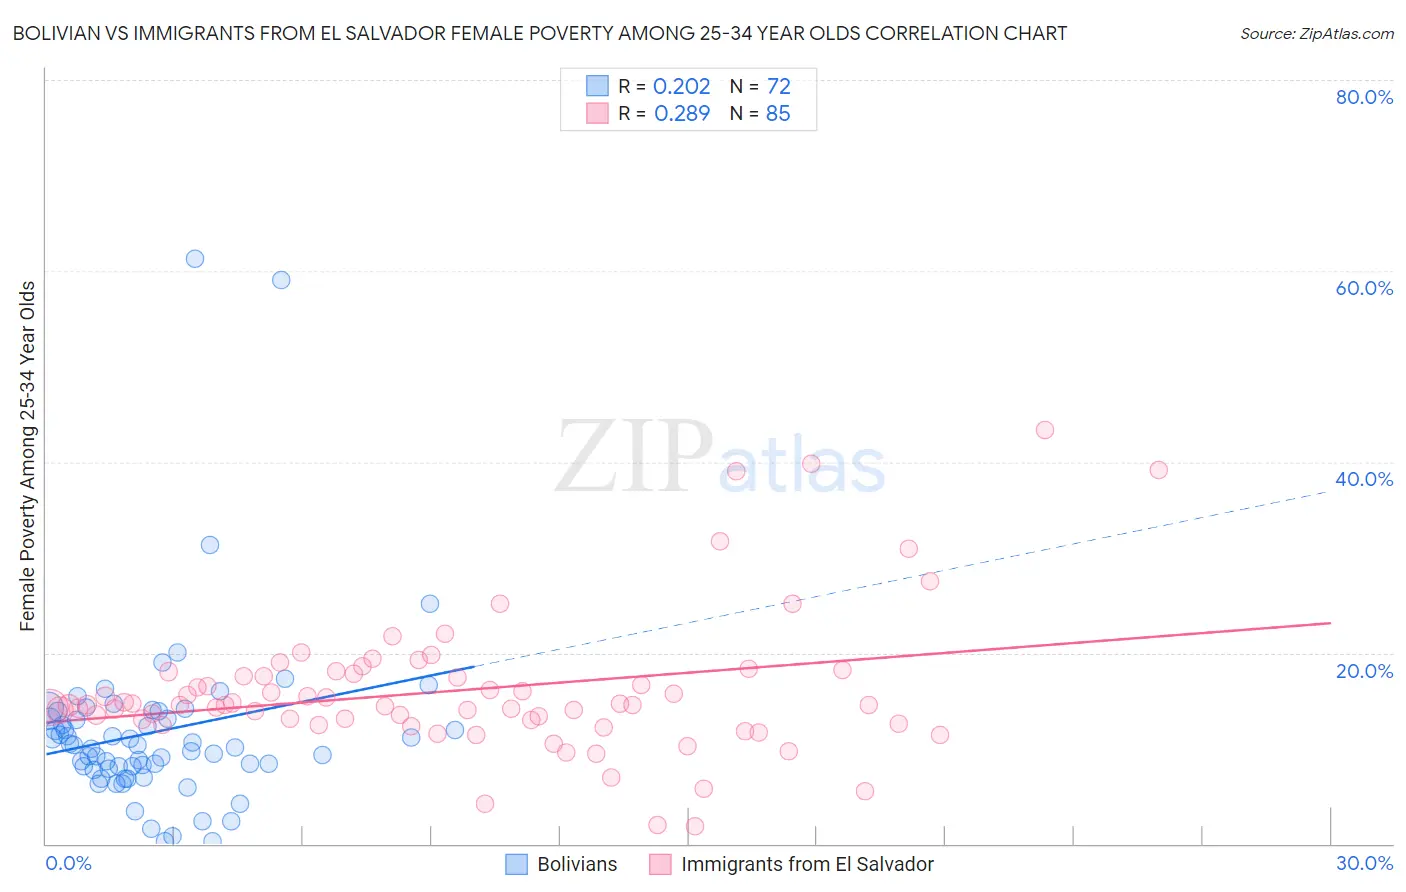 Bolivian vs Immigrants from El Salvador Female Poverty Among 25-34 Year Olds